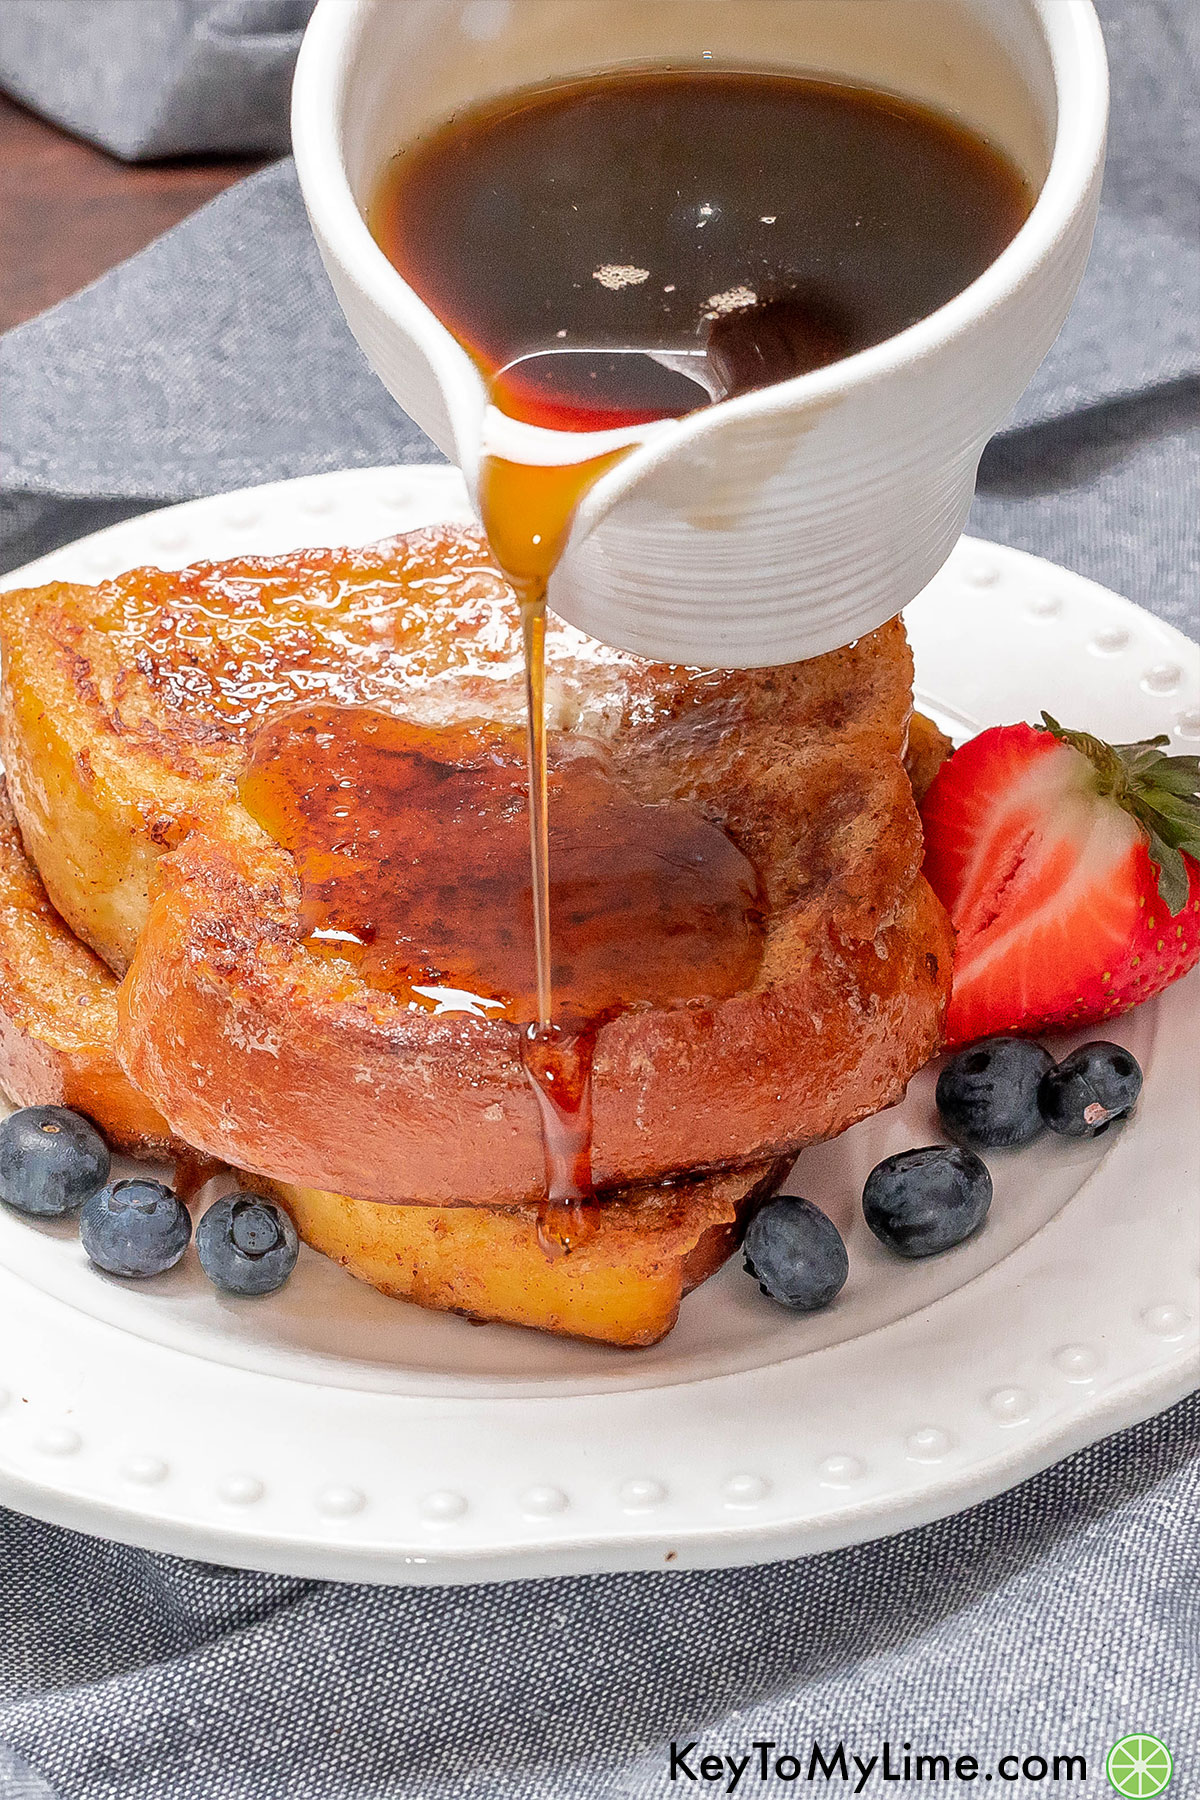 Pouring maple syrup from a small pitcher on top of a stack of French toast.